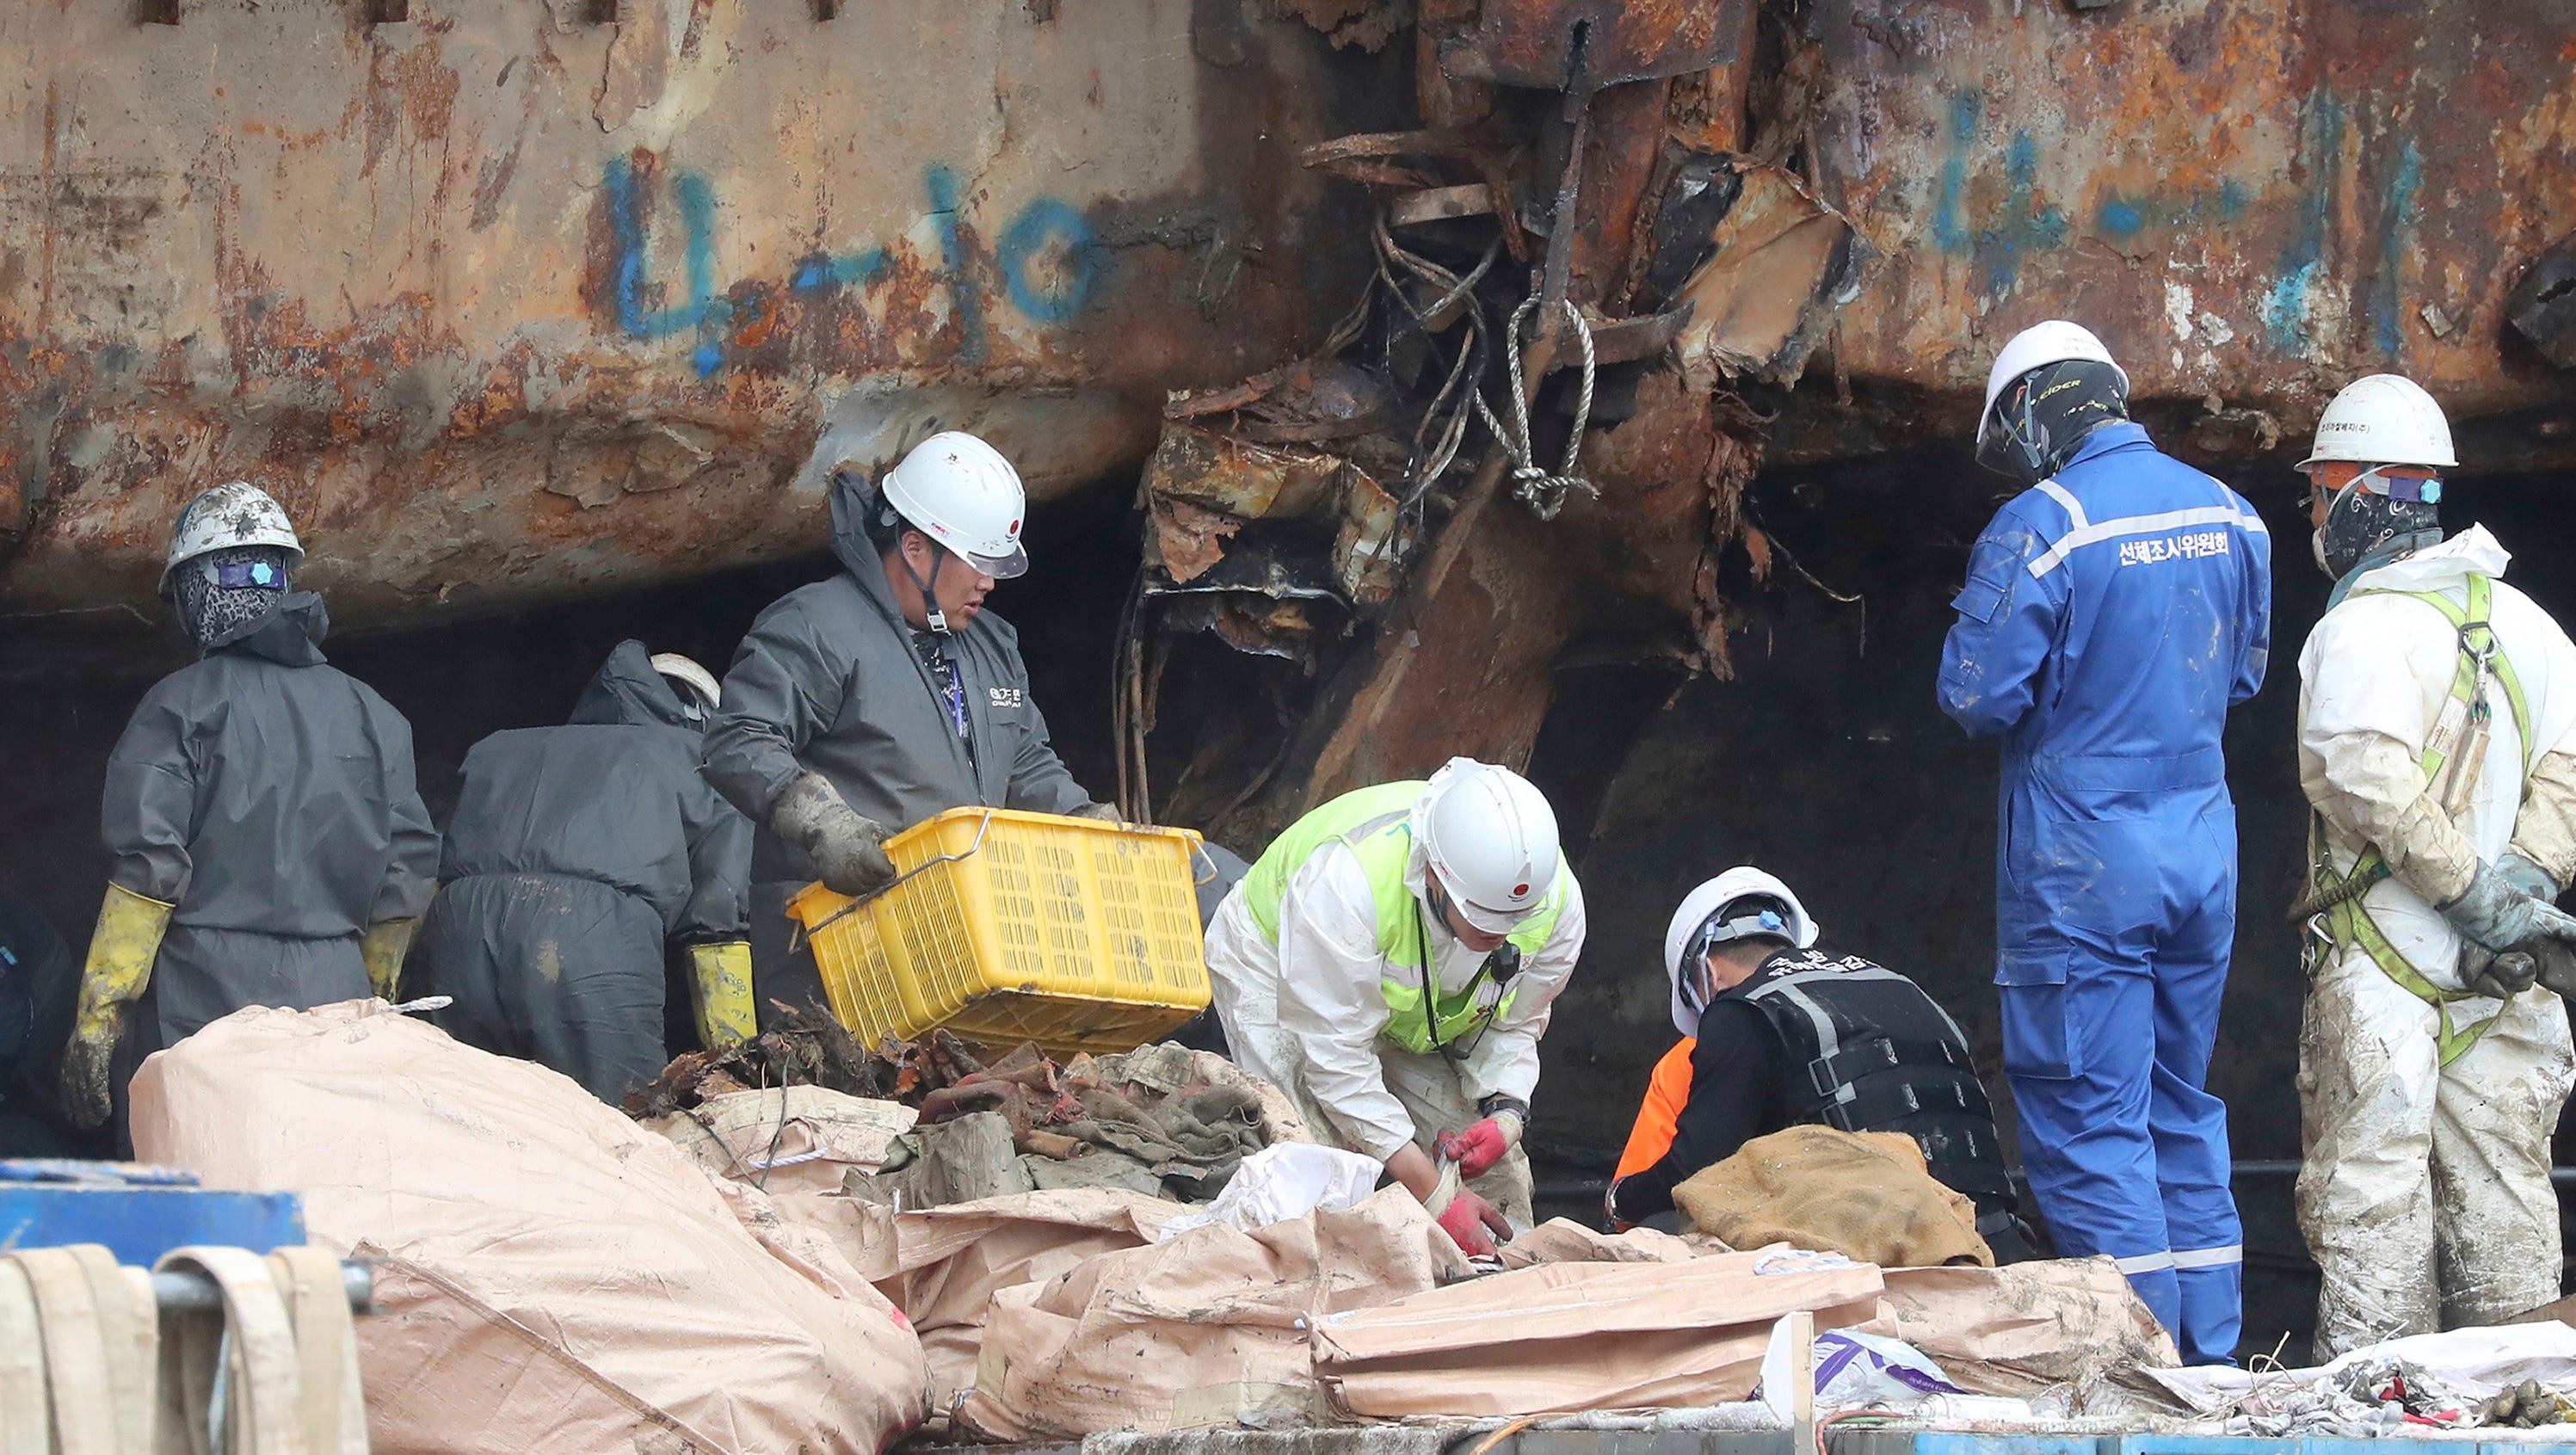 South Korea Sewol ferry disaster: Suspected human bones retrieved from